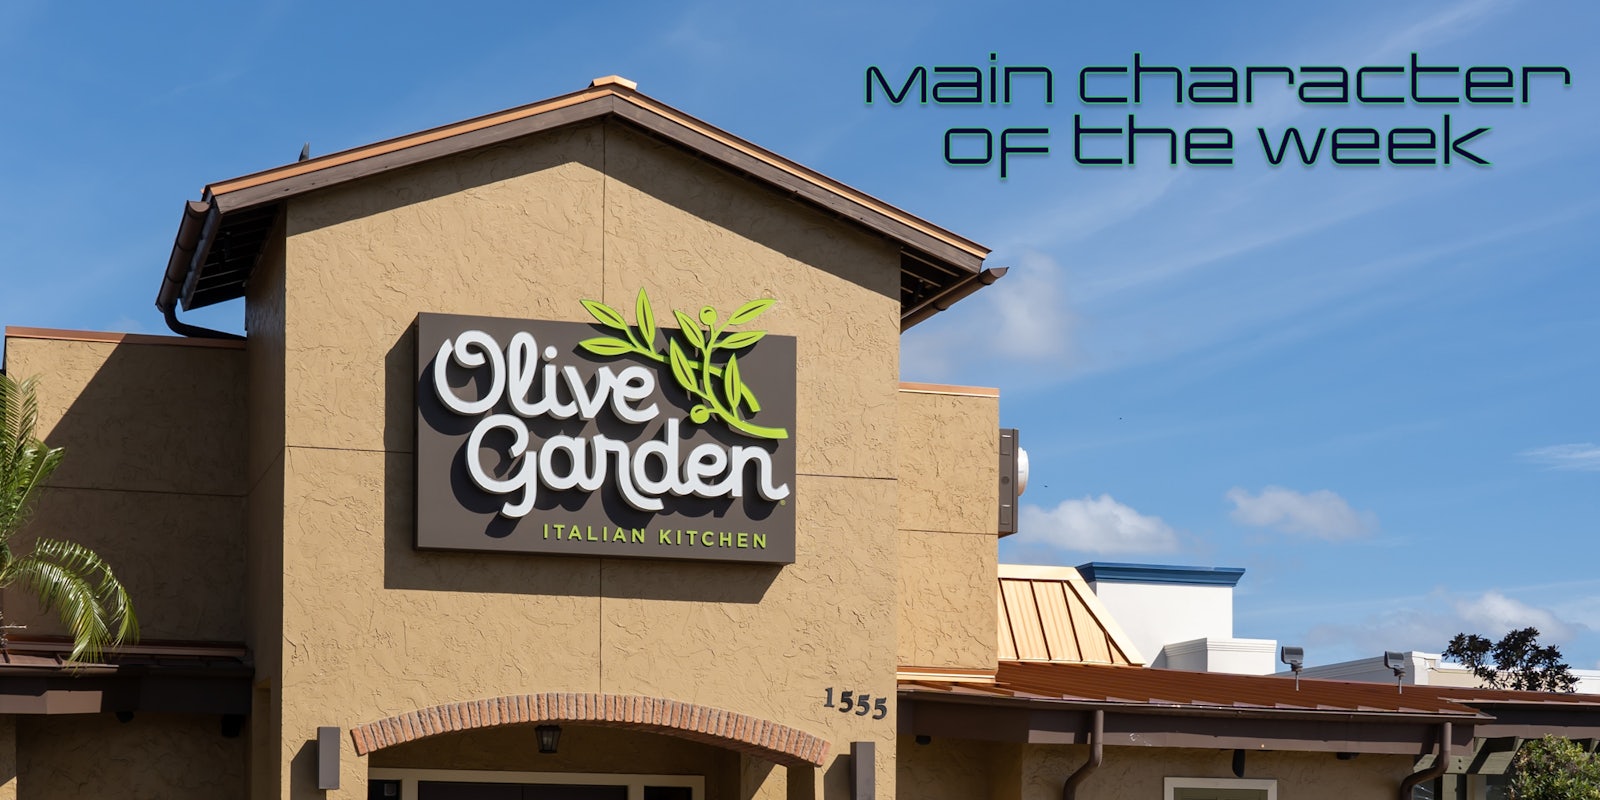 An Olive Garden with text that says 'Main Character of the Week' in a web_crawlr font.